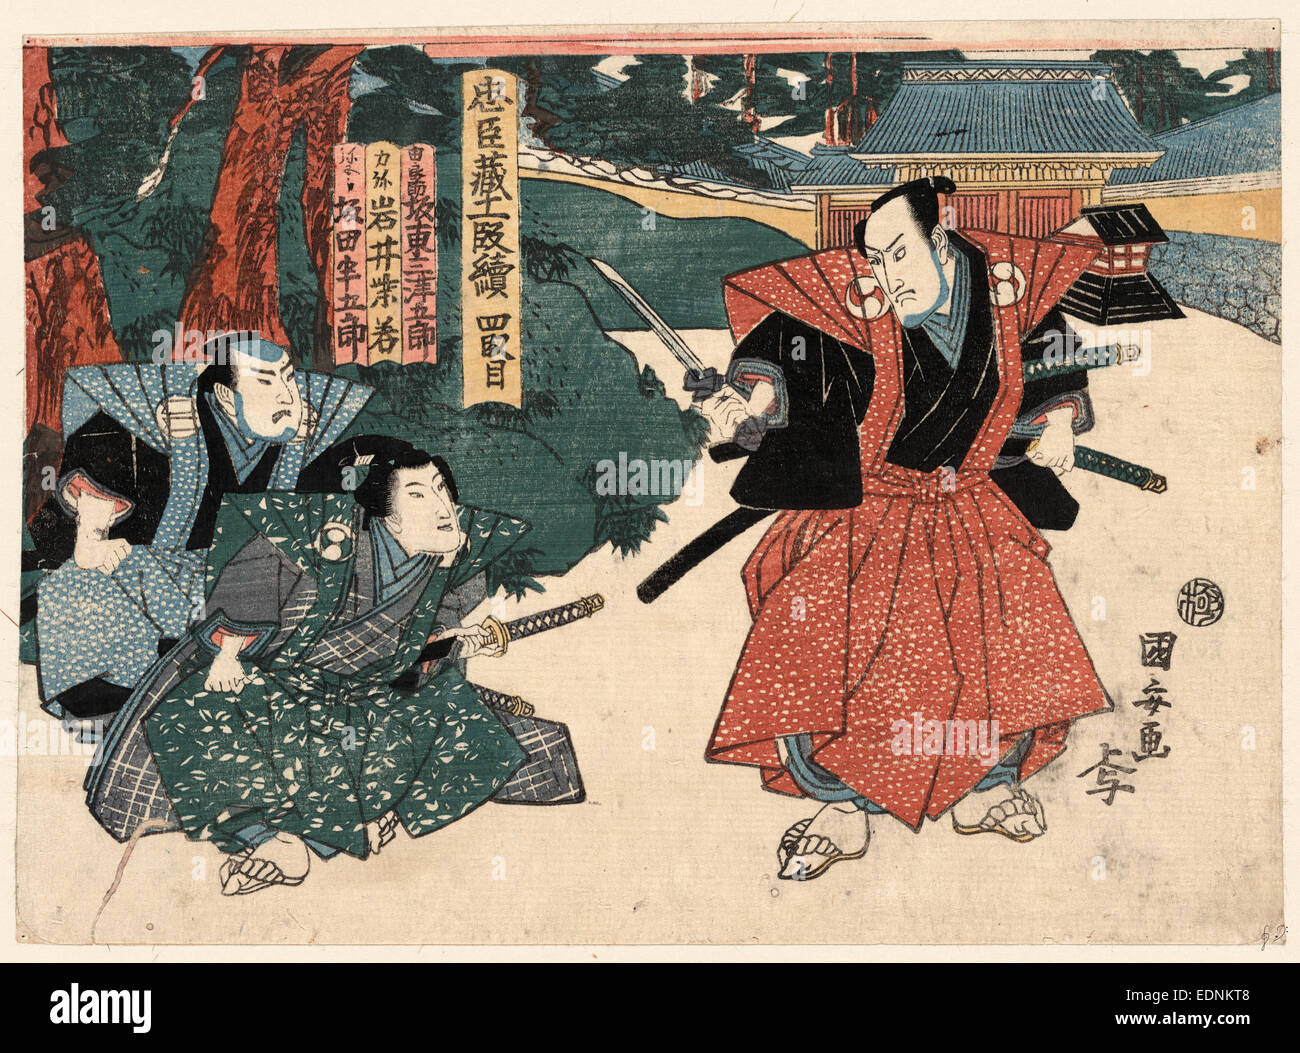 Yodanme, Act four [of the Chushingura]., Utagawa, Kuniyasu, 1794-1832, artist, [between 1815 and 1818], 1 print : woodcut, color ; 18.5 x 25.8 cm., Print shows three actors, two possibly represent  royal envoys who are to deliver the message that Enya Hangan (Asano Naganori) is to committ seppuku, ritual suicide, the third man is possibly Hangan brandishing a short sword or dagger with which to disembowl himself. Stock Photo